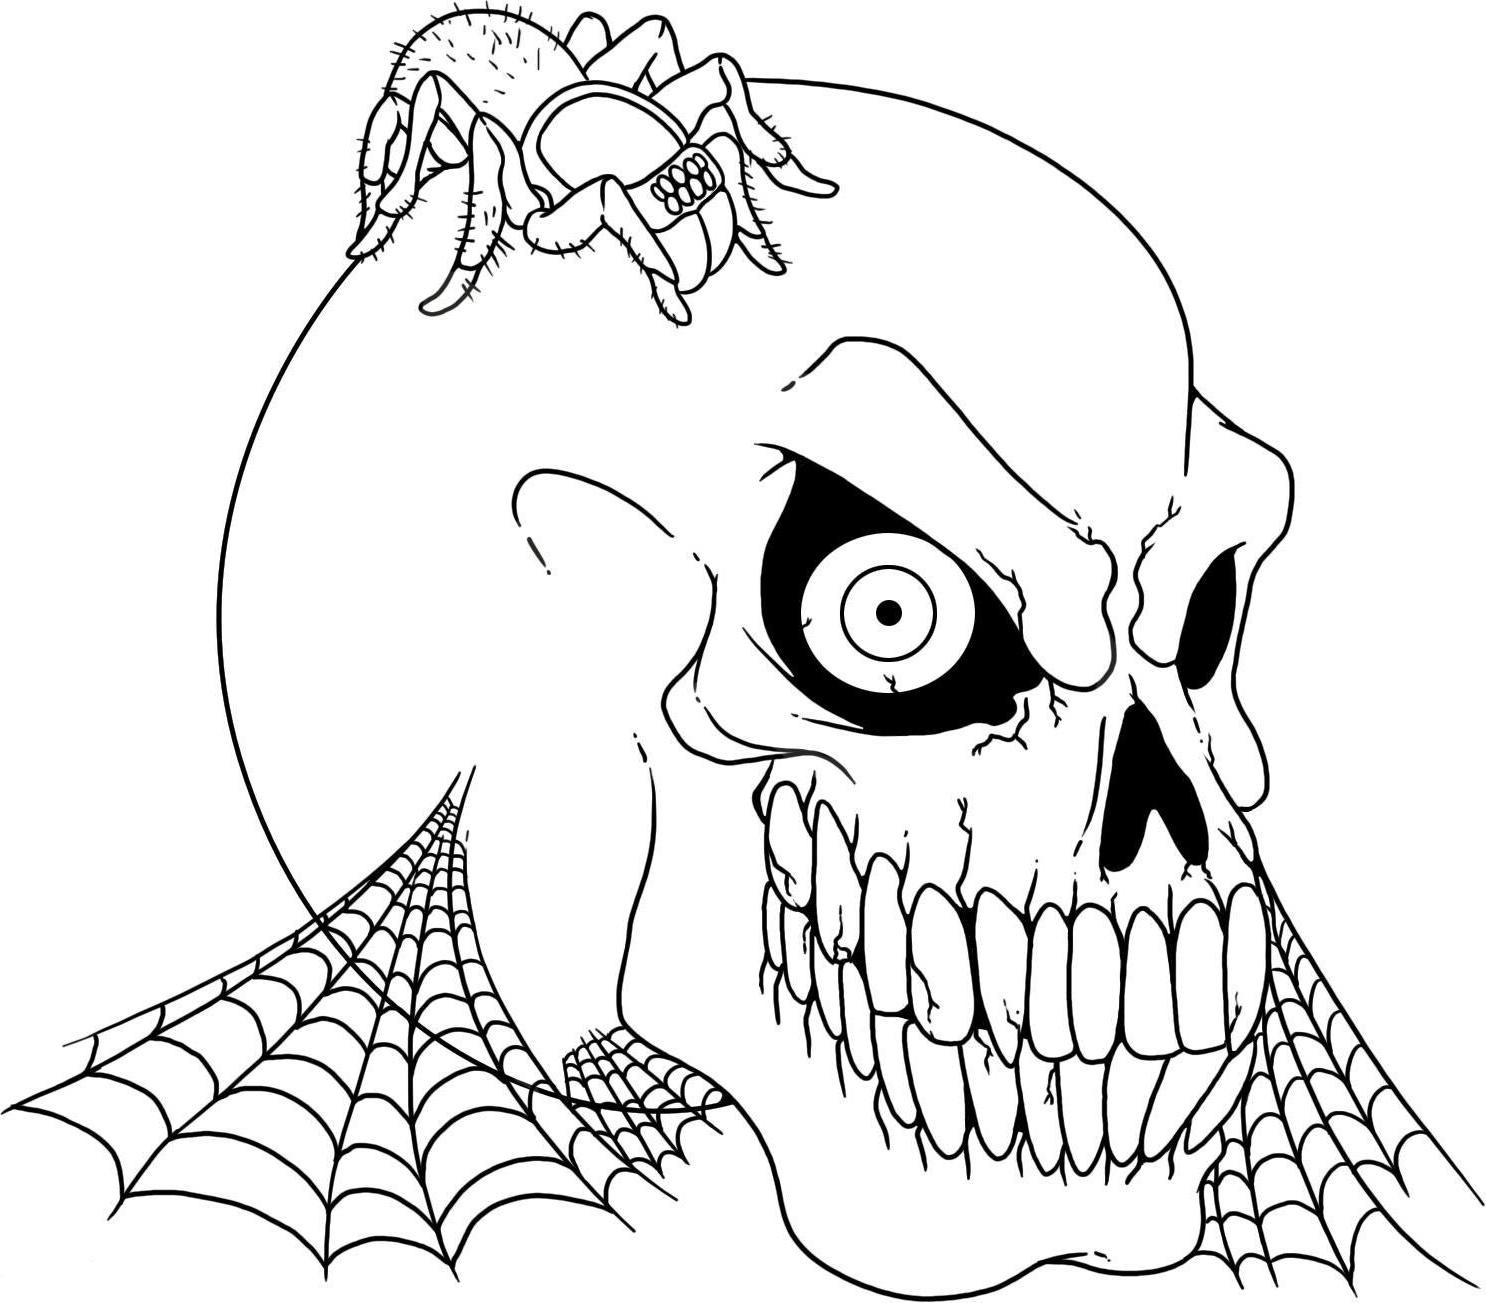 Halloween Coloring Pages For Teens
 Scary Halloween Coloring Pages For Teens Coloring Home